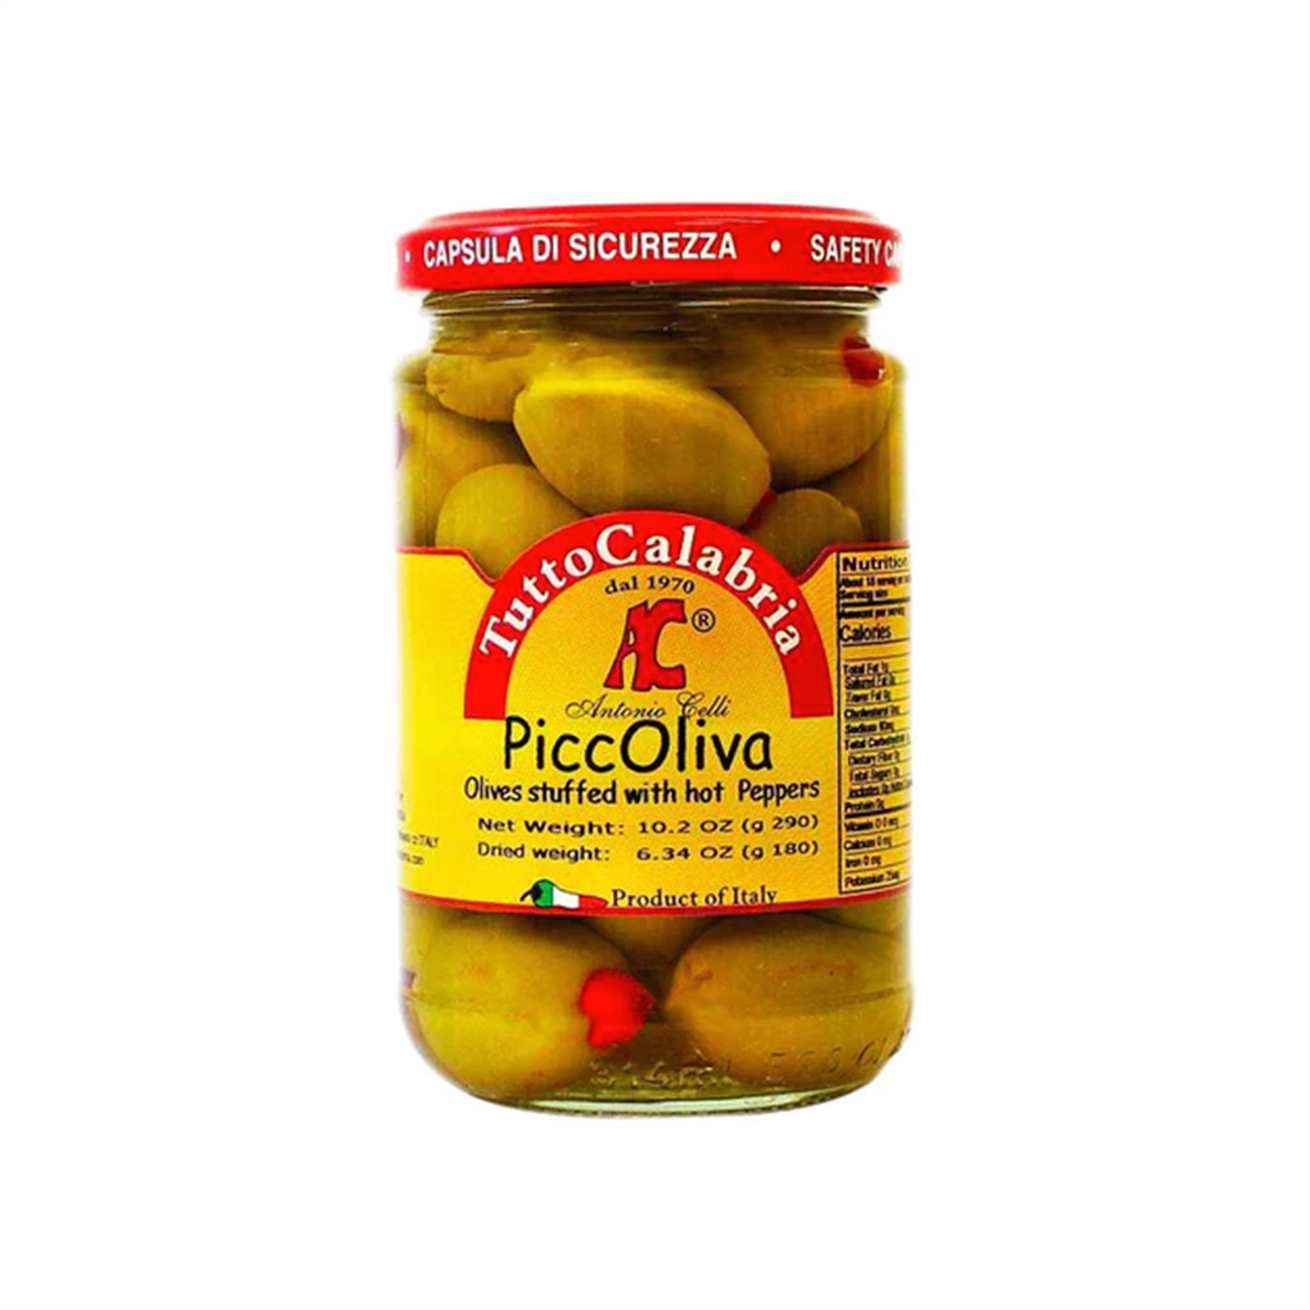 TUTTO CALABRIA PICCOLIVA OLIVES STUFFED WITH PEPPERS 285g